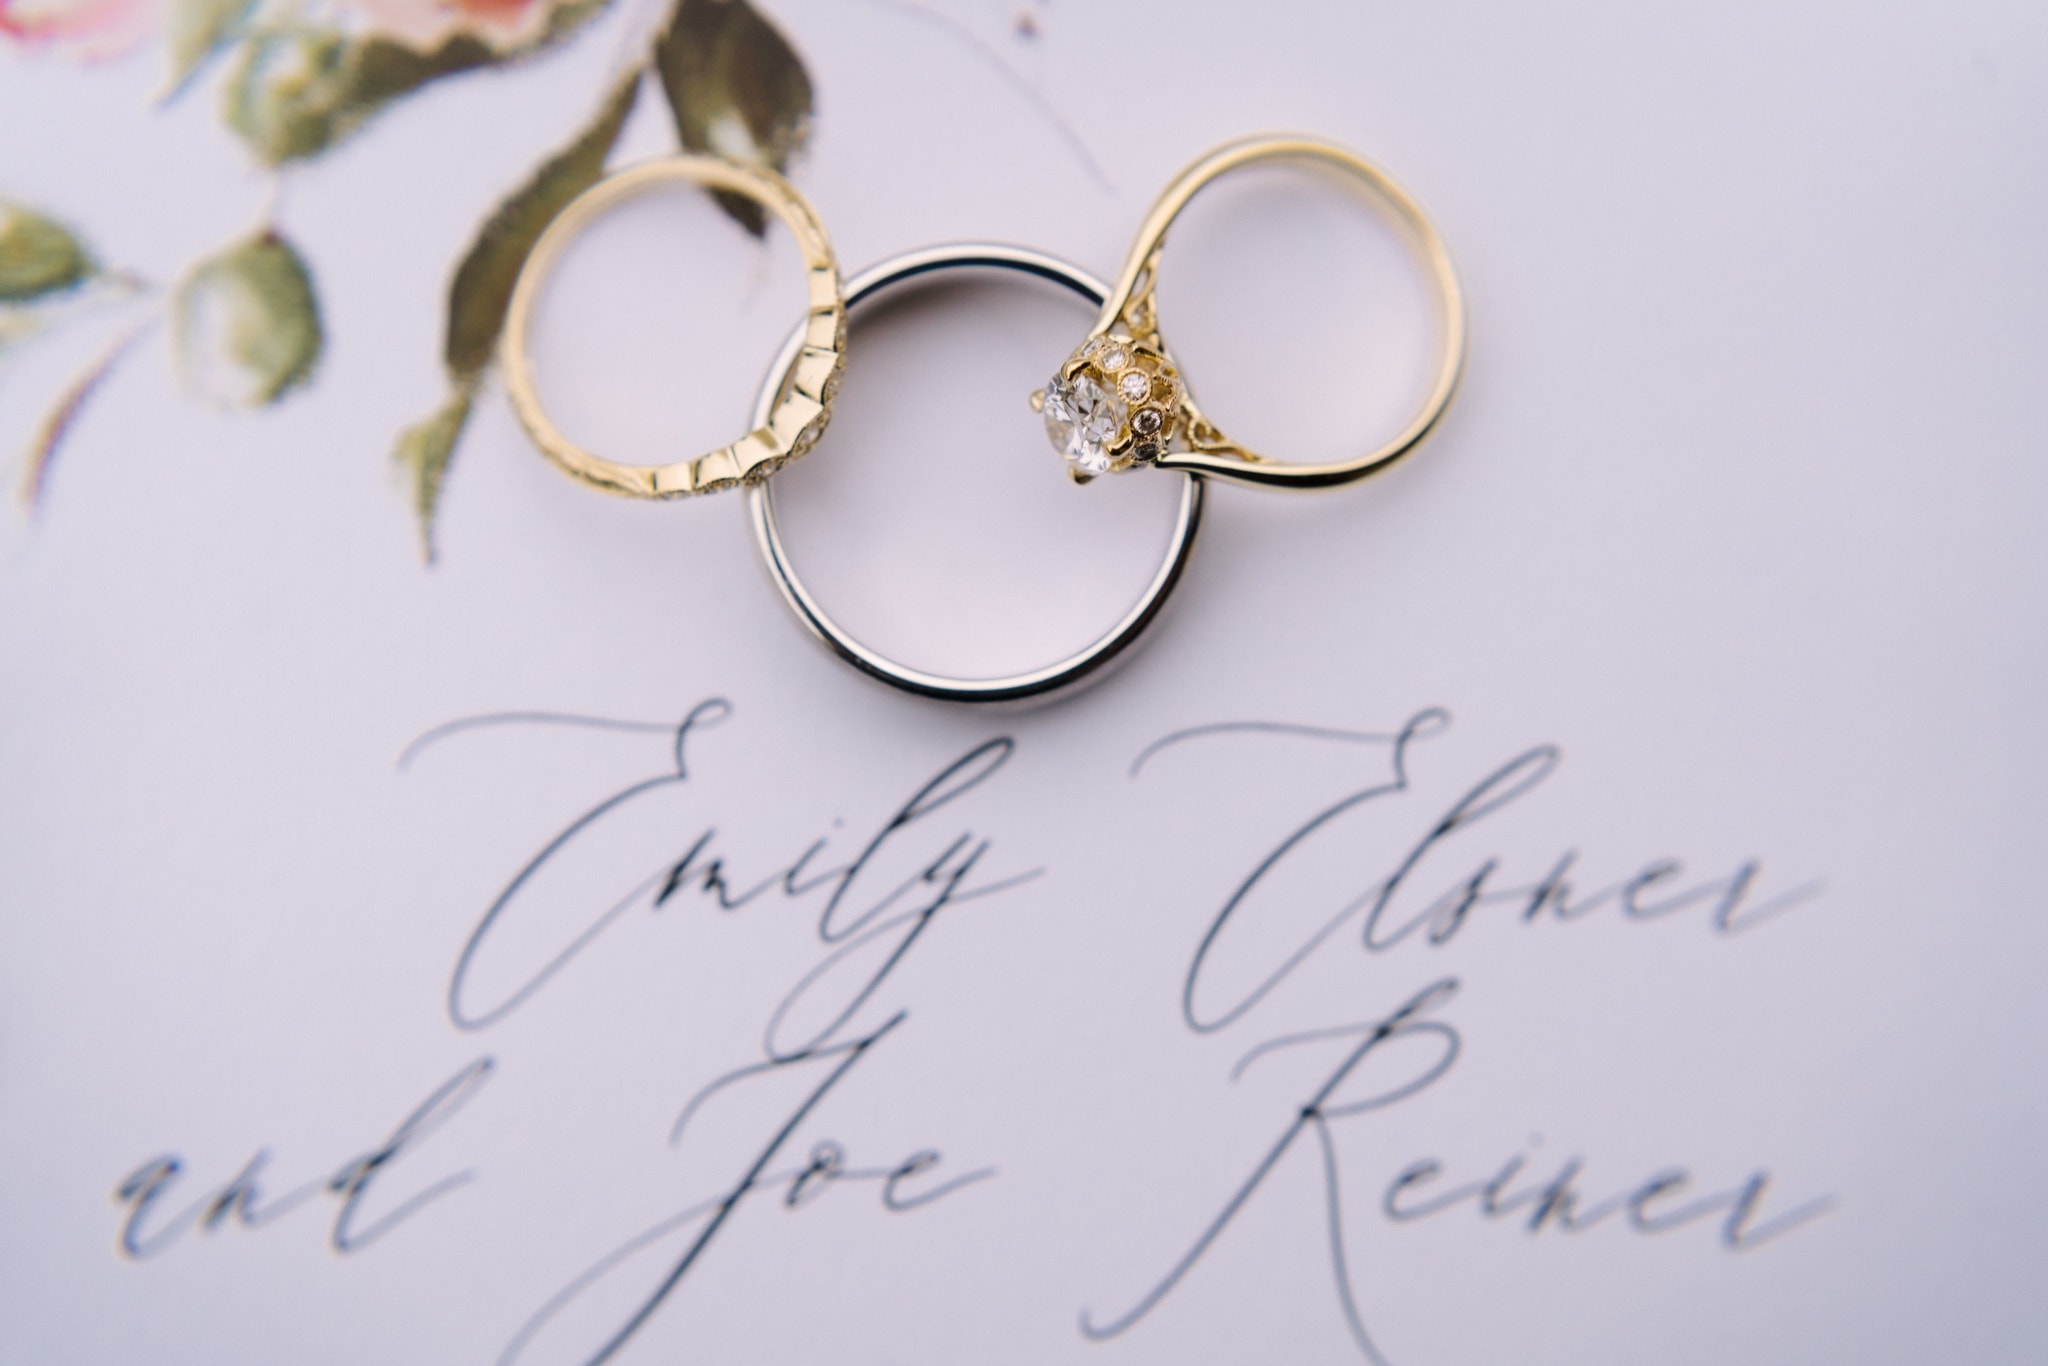 wedding invitation detail with wedding and engagement rings